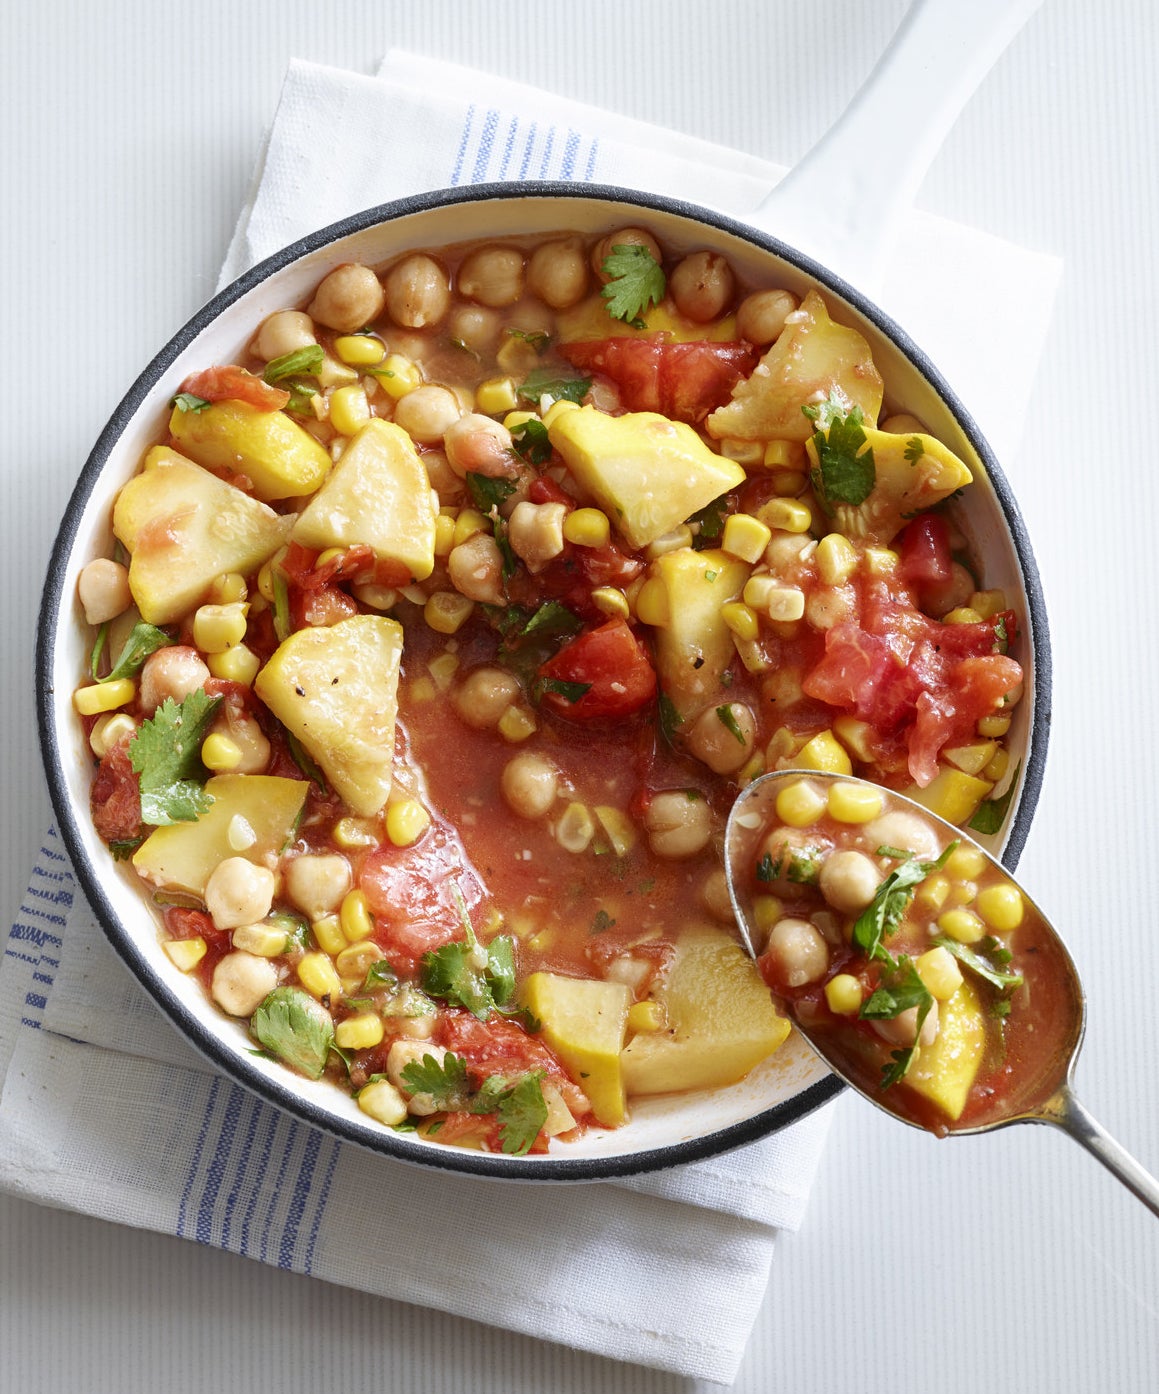 A bowl of chickpea and vegetable soup.